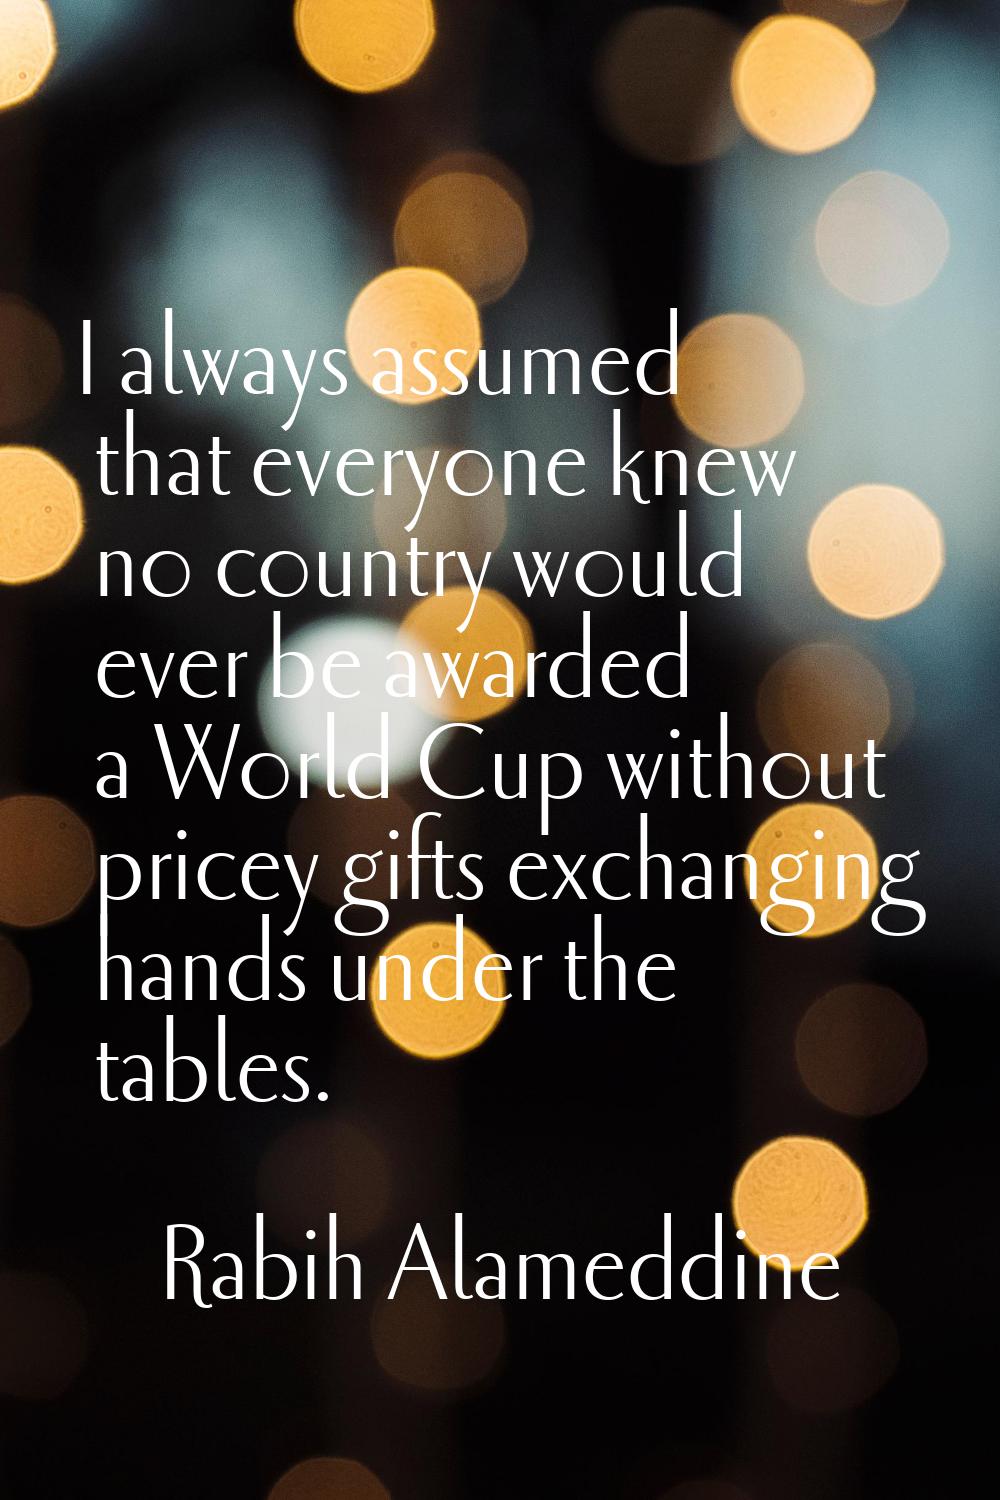 I always assumed that everyone knew no country would ever be awarded a World Cup without pricey gif